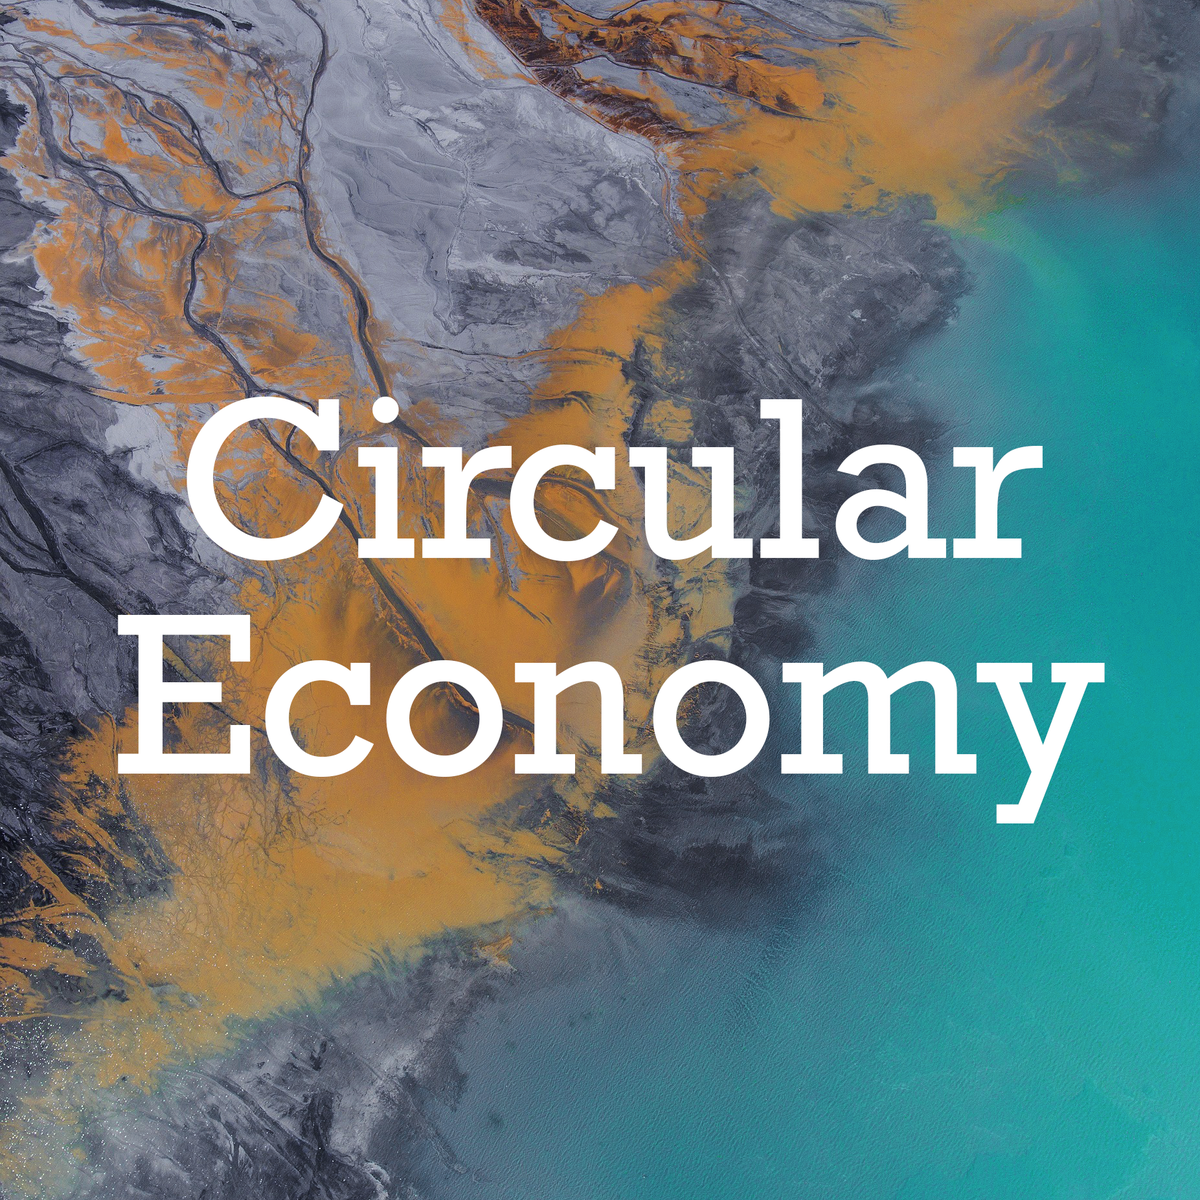 Circular Economy - Sustainable Materials Management Coupon